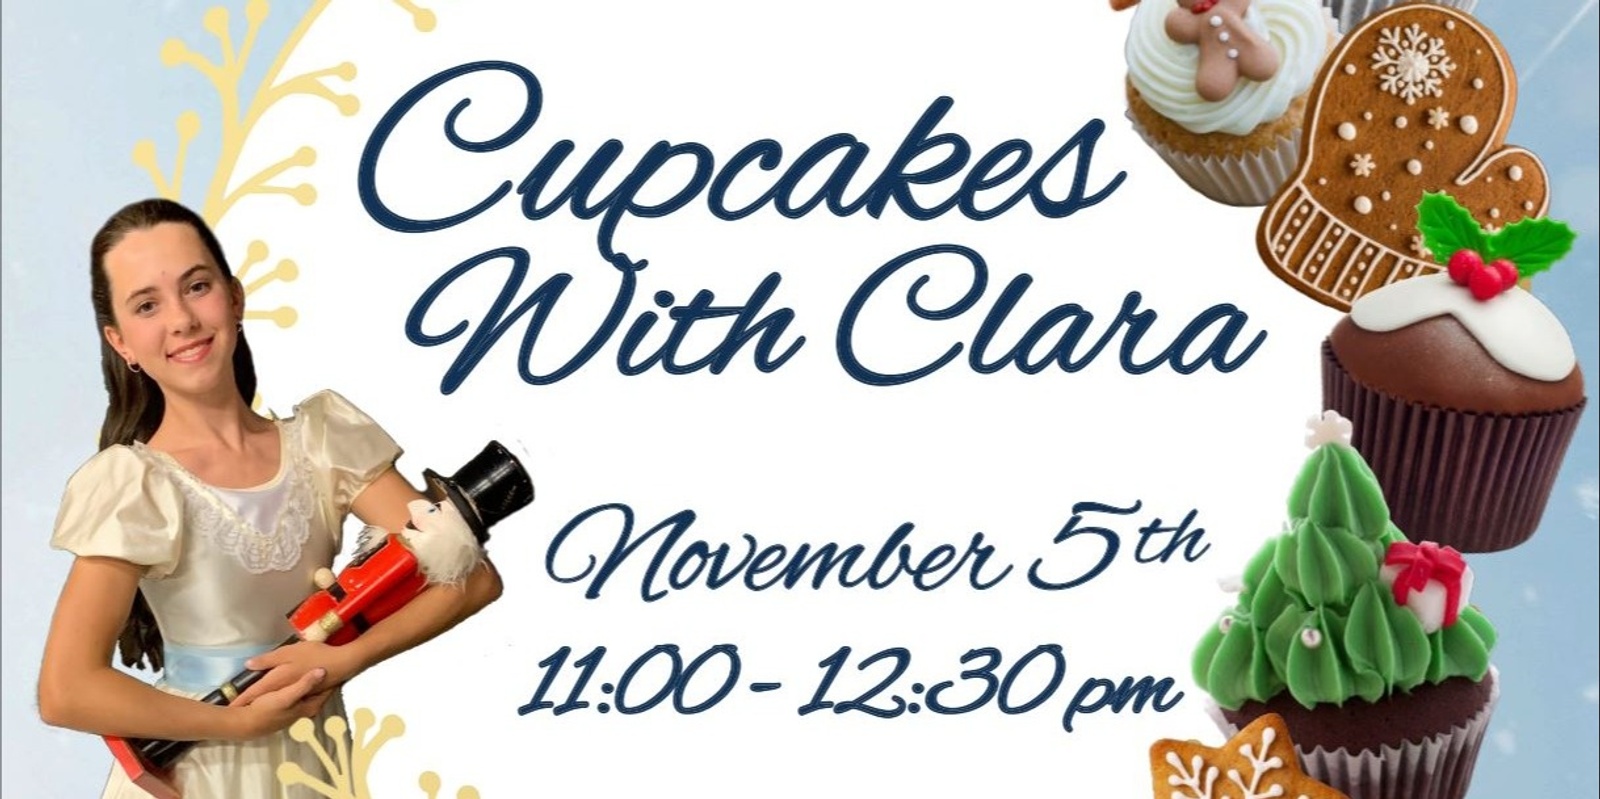 Banner image for Cupcakes with Clara 